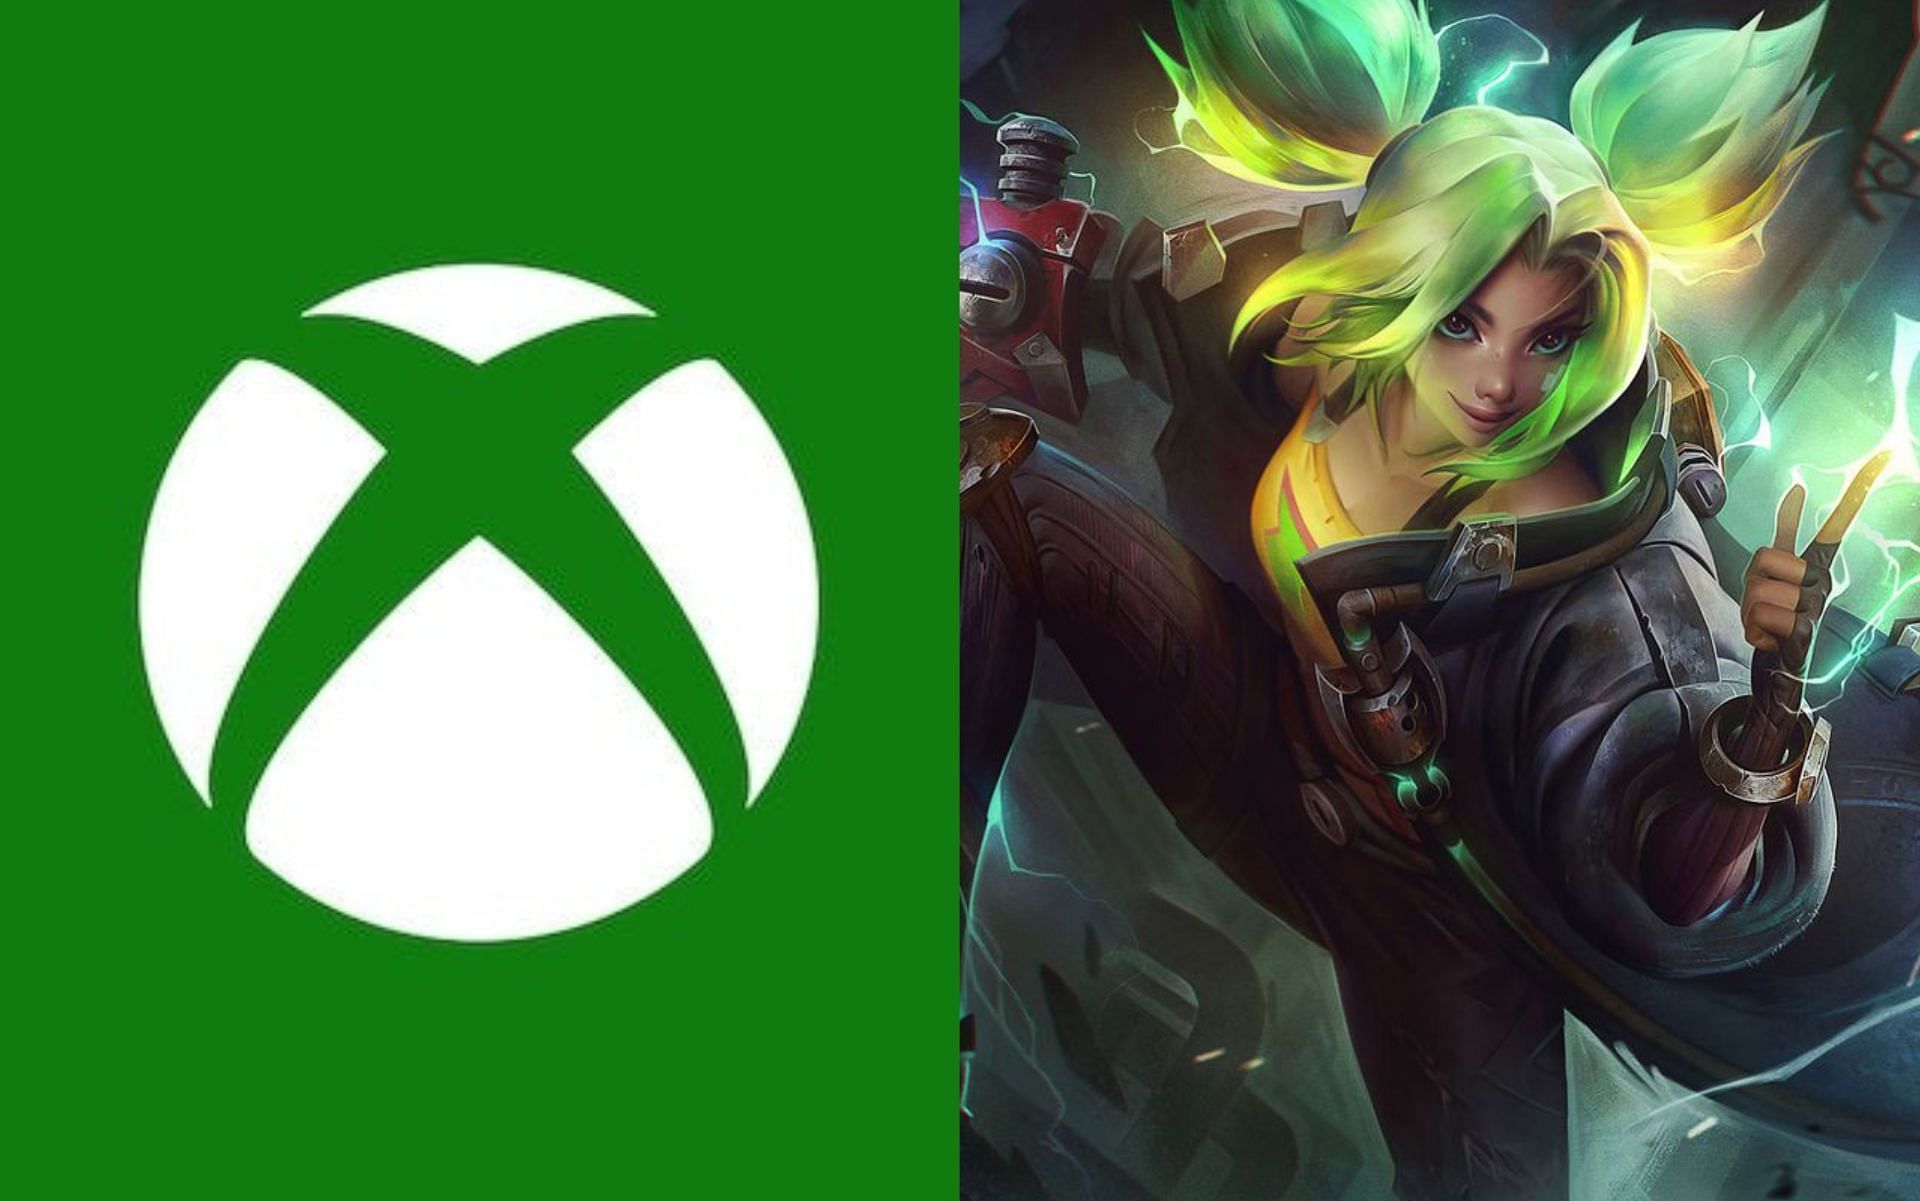 The highly anticipated collaboration between Xbox Game Pass and League of Legends is set to arrive in a few days time (Image via Riot Games and Xbox)